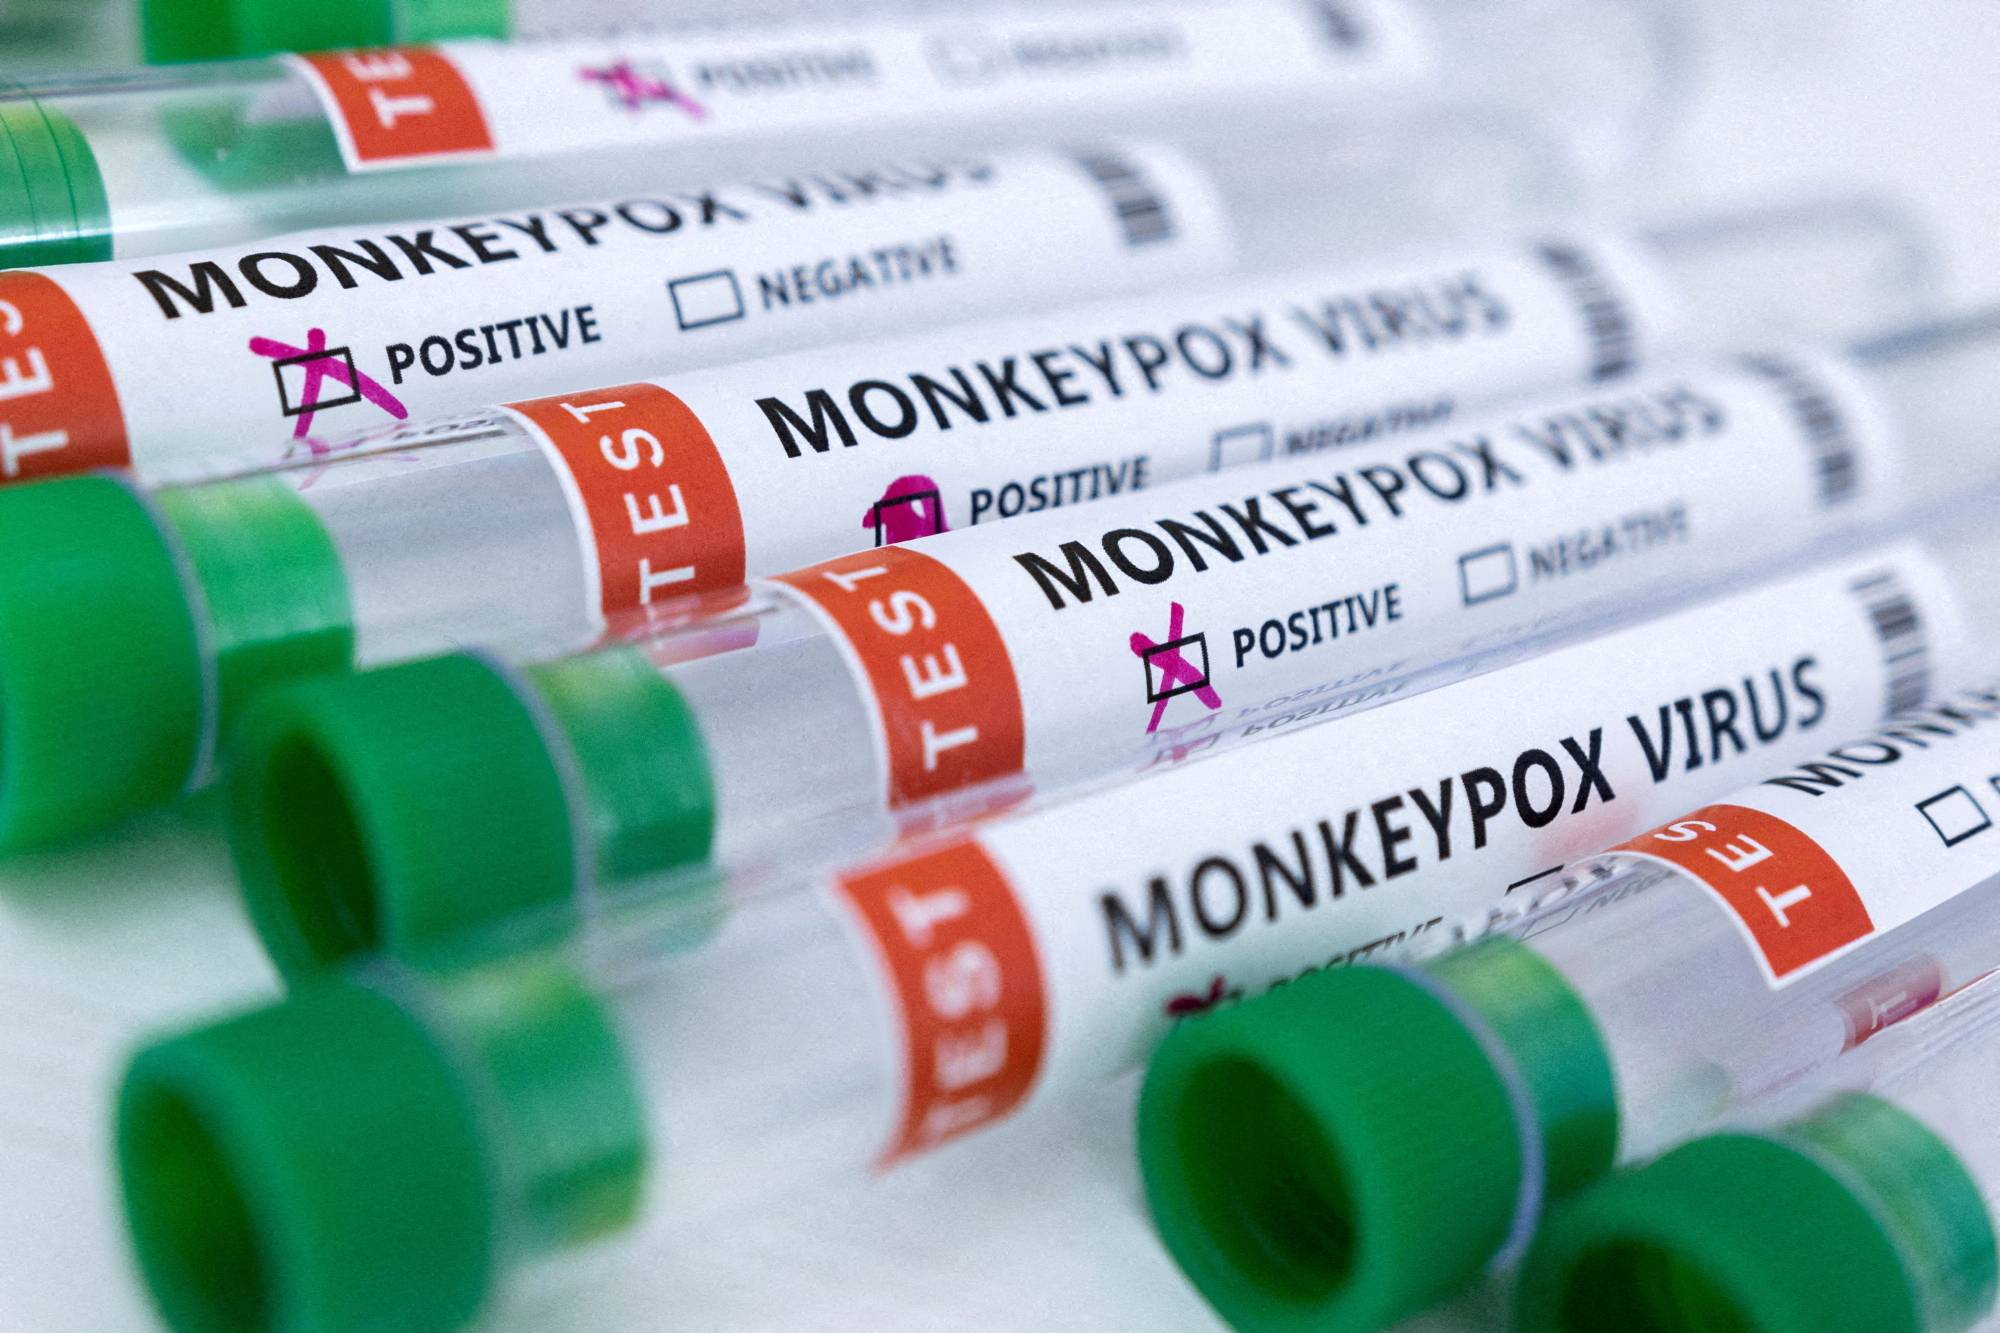 Japan held the nation’s first emergency meeting on monkeypox Monday and decided to step up surveillance and preventive measures. | REUTERS